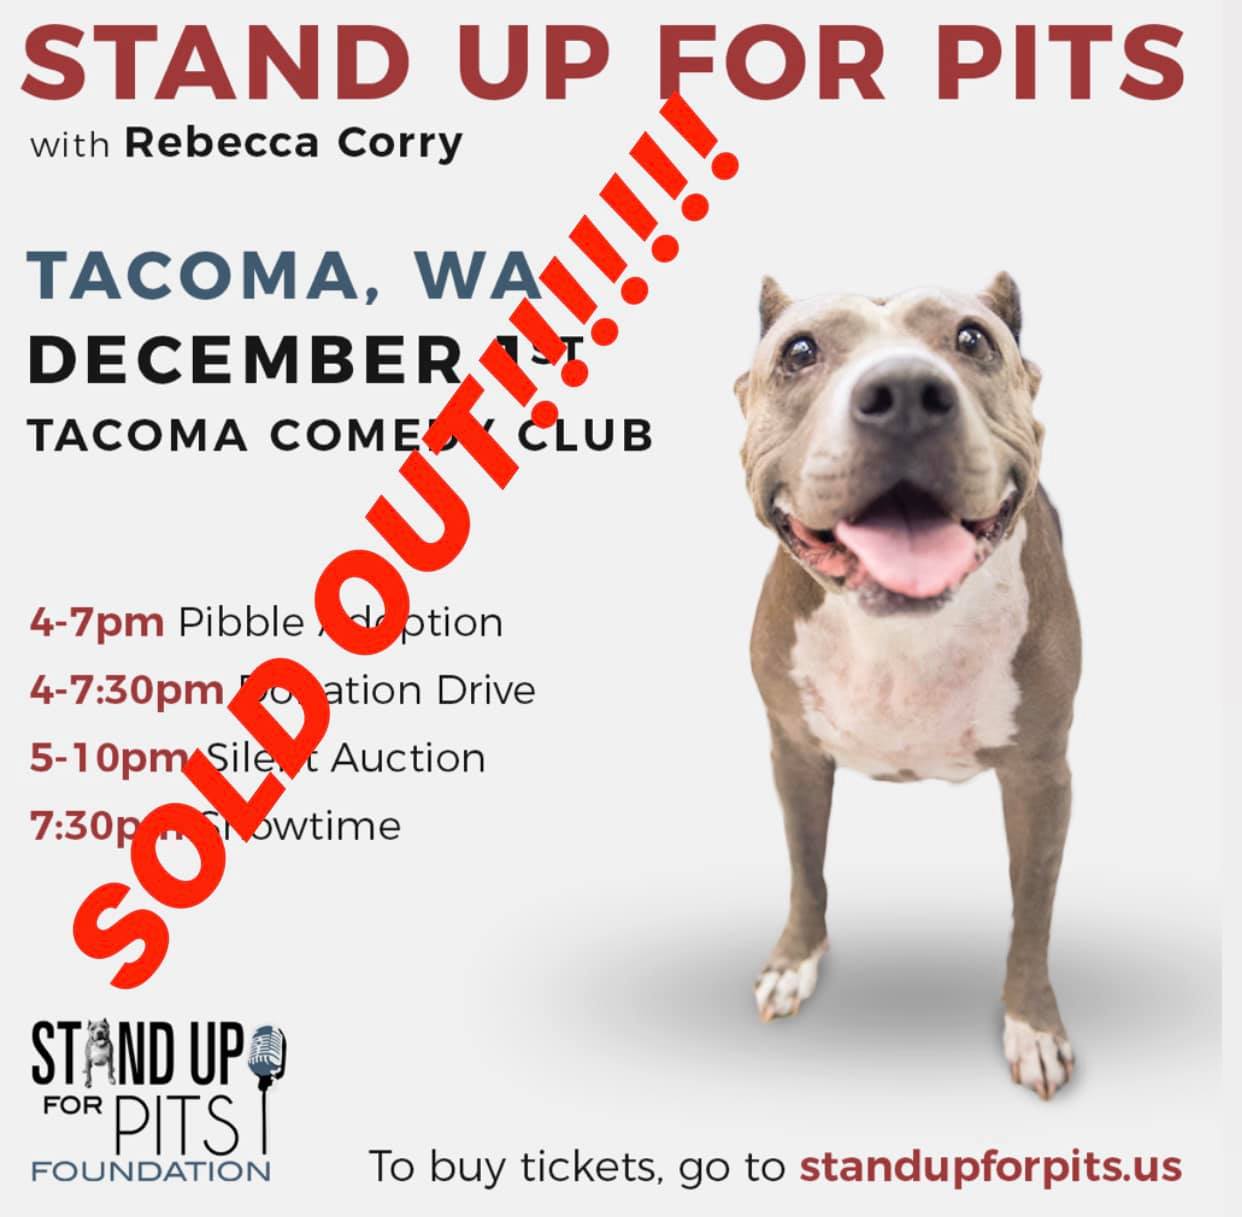 STAND UP FOR PITS TACOMA IS SOLD OUT!!!